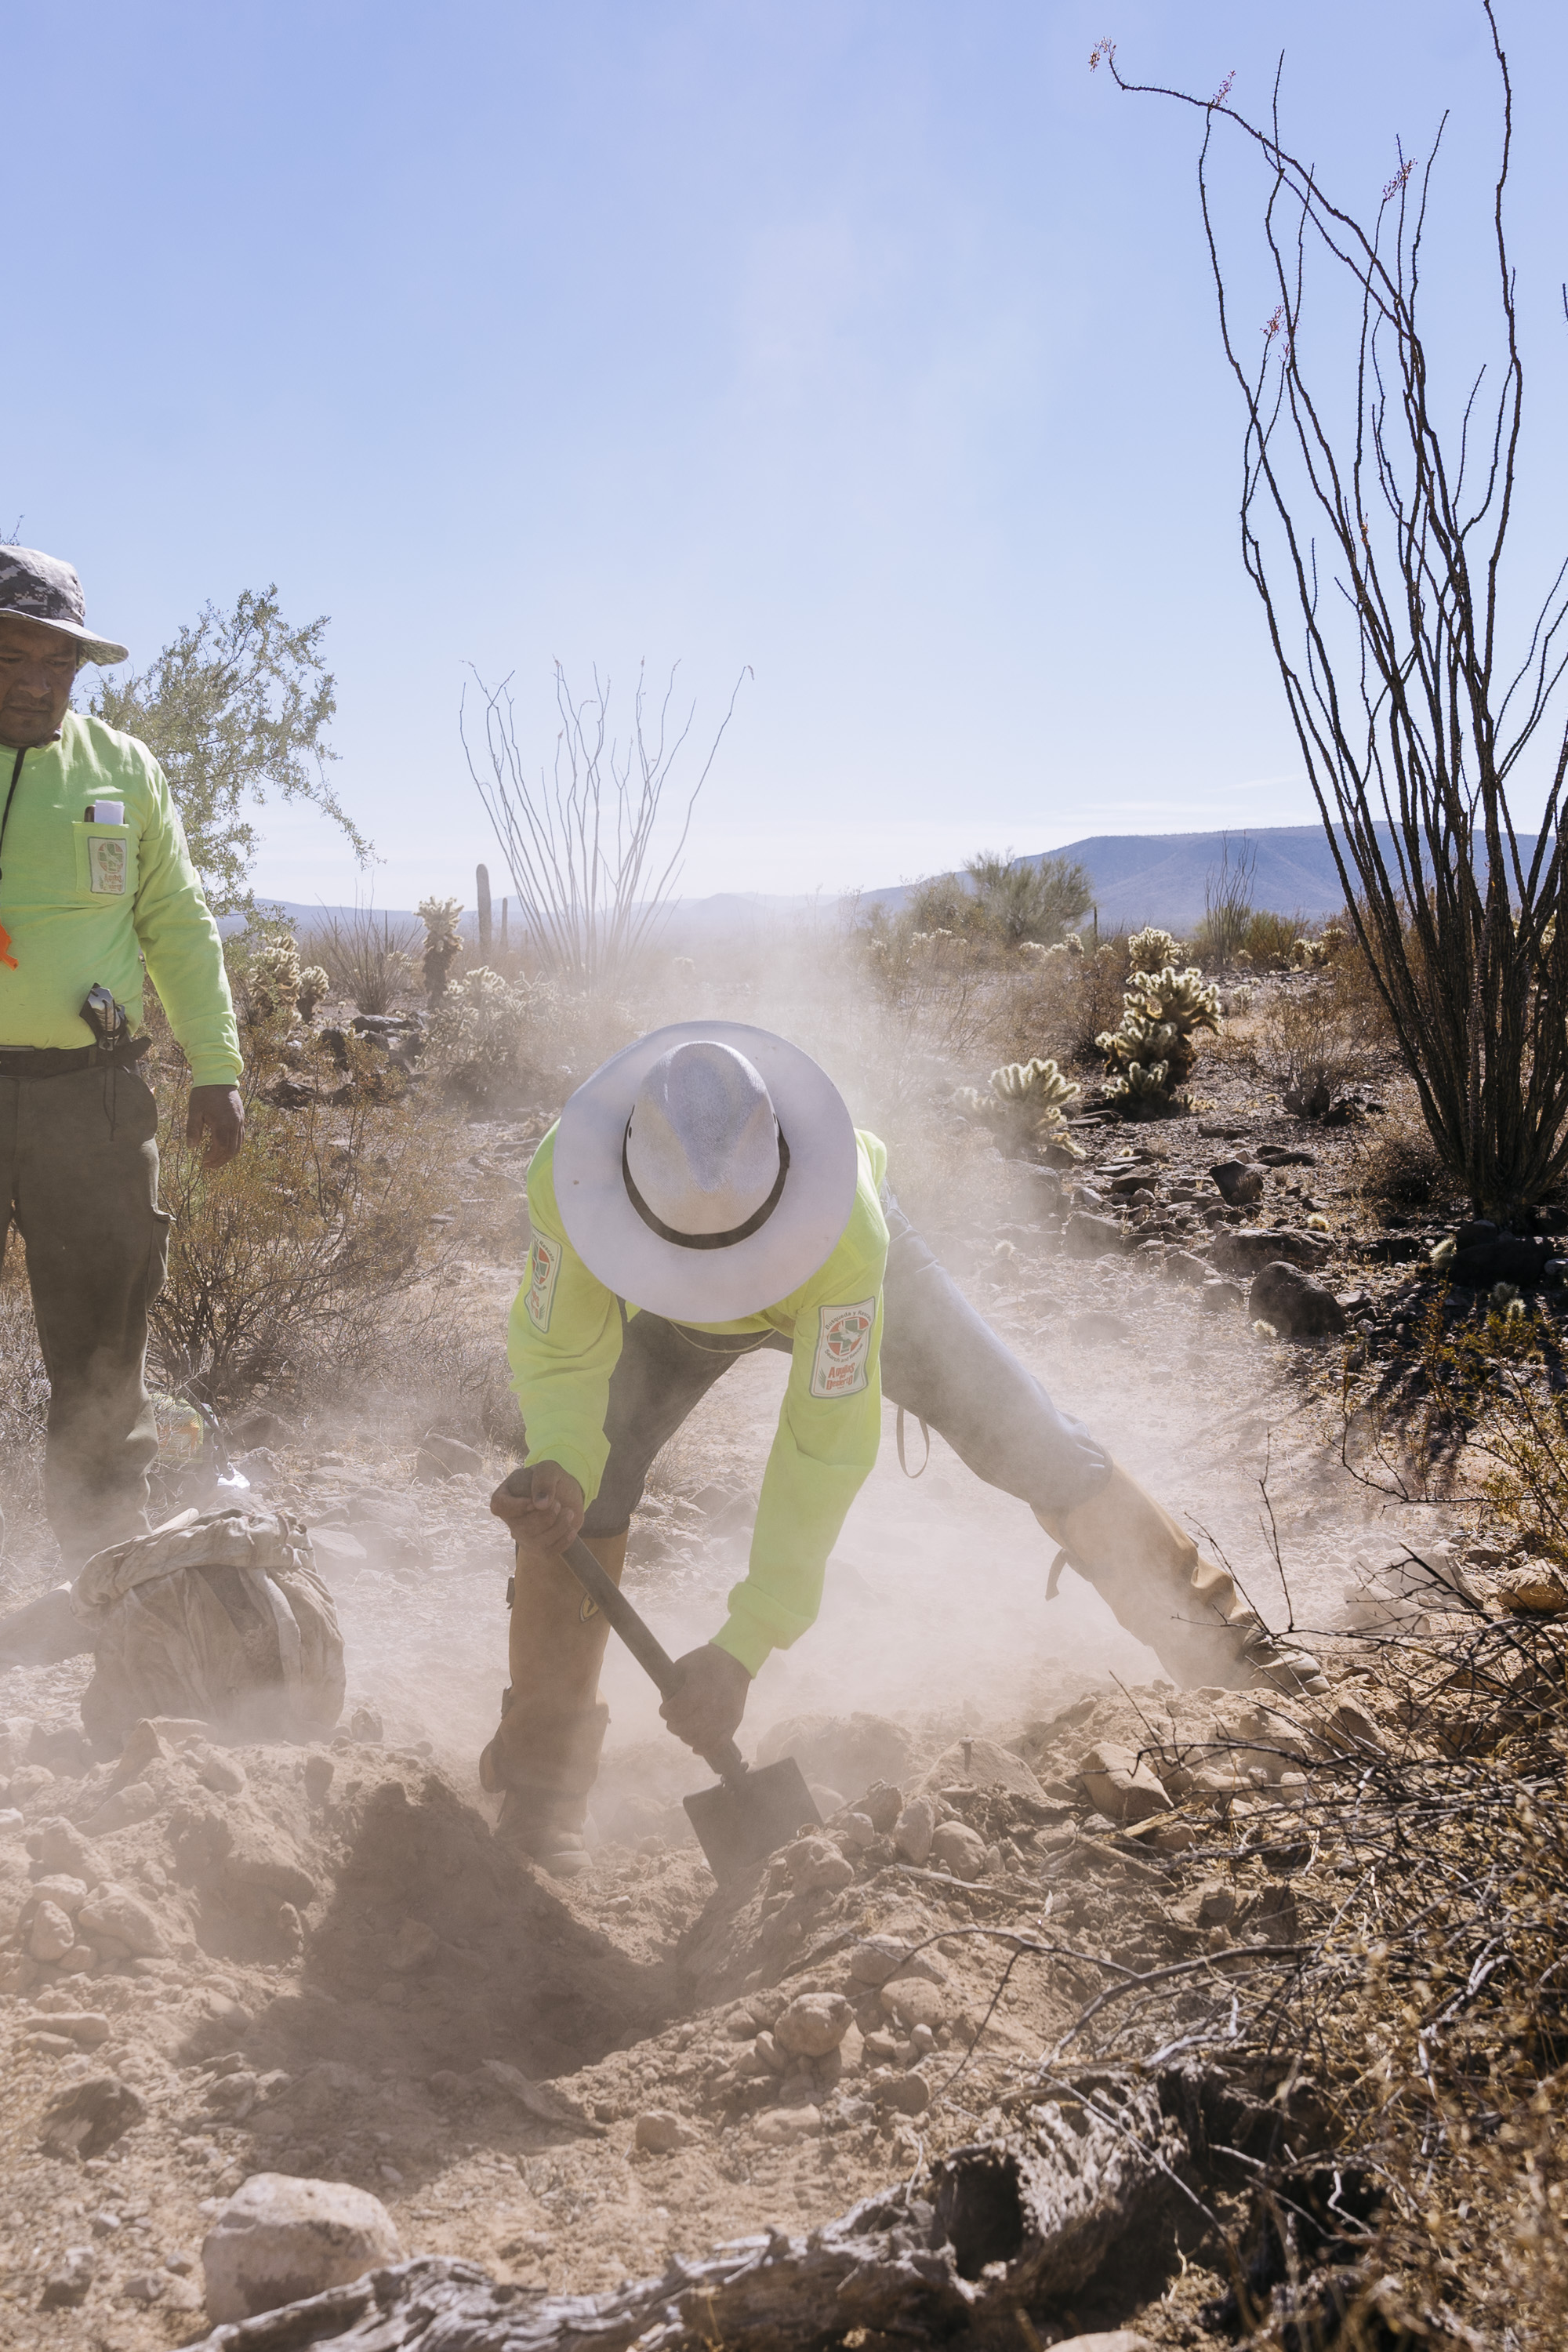  IMAGE CAPTION:  Members of Aguilas Del Desierto dig in the Sonoran Desert where they suspect the body of a migrant has been buried in a shallow grave. Most migrants who die crossing this treacherous desert have been left behind by the their guides a